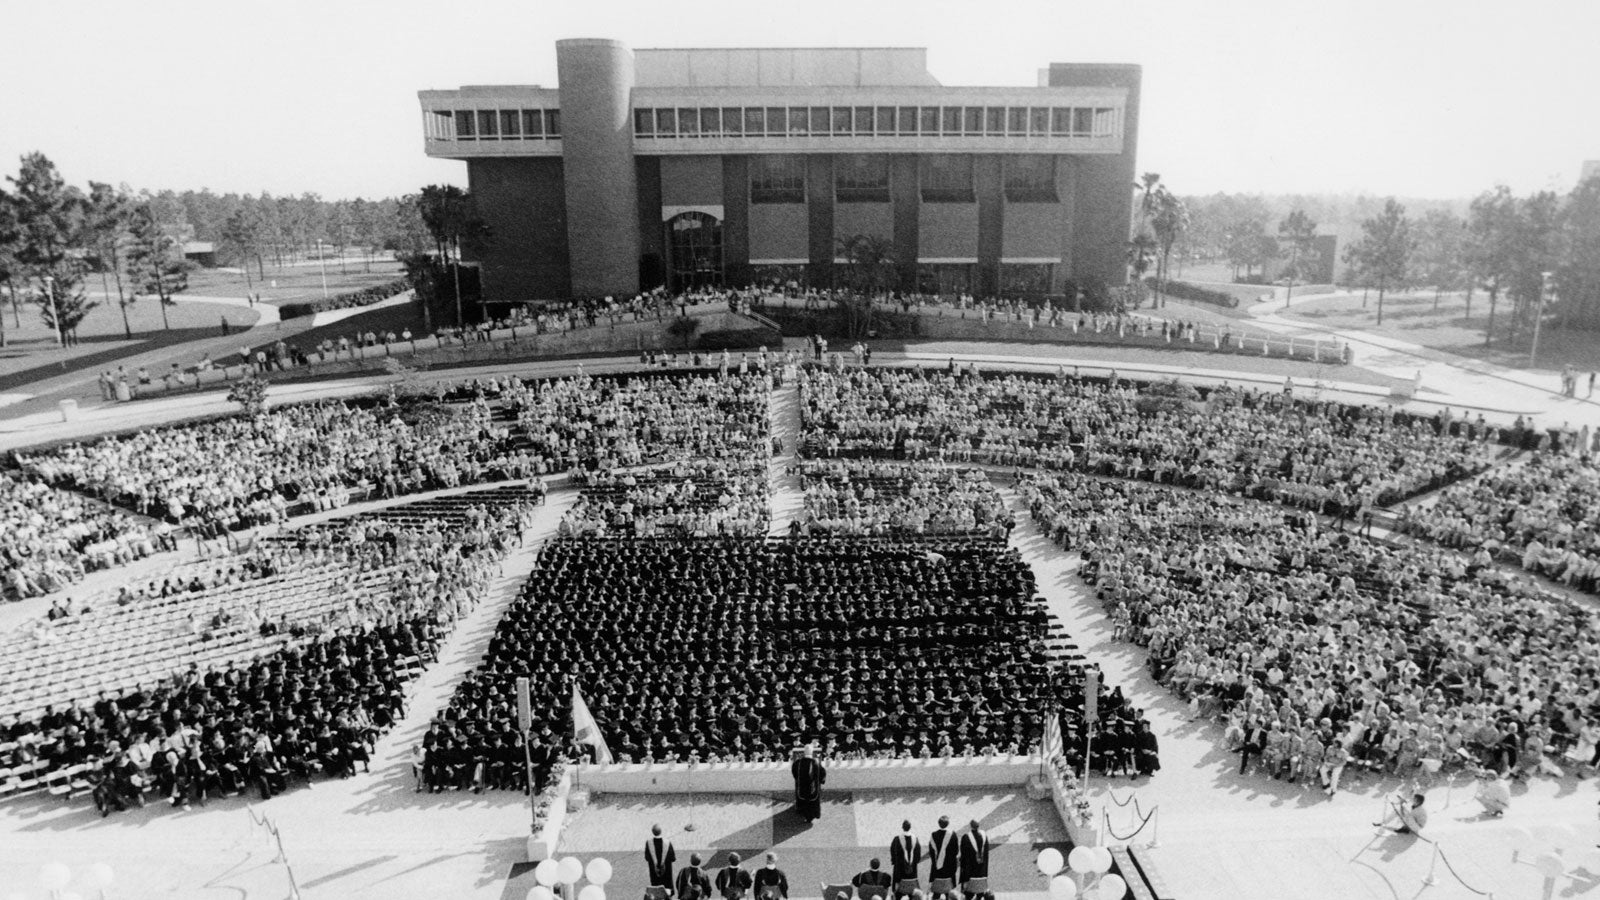 Back in the Day: Commencement Through the Years